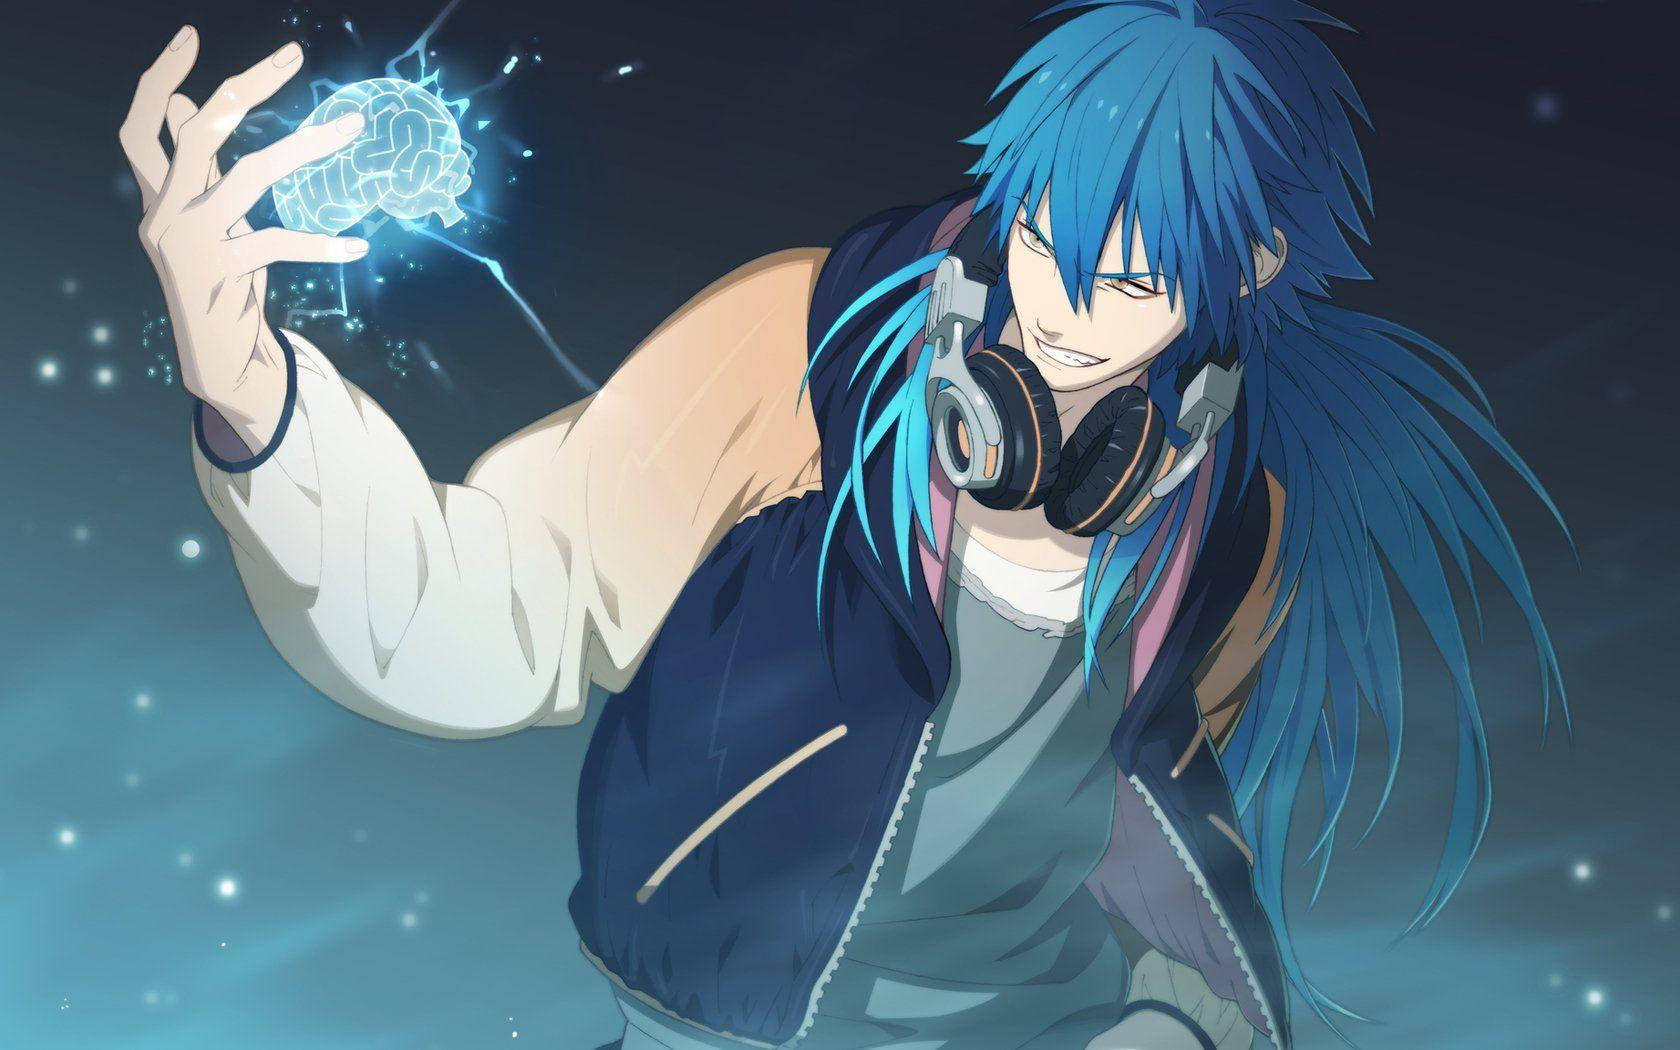 A youthful anime boy with blue hair. Wallpaper